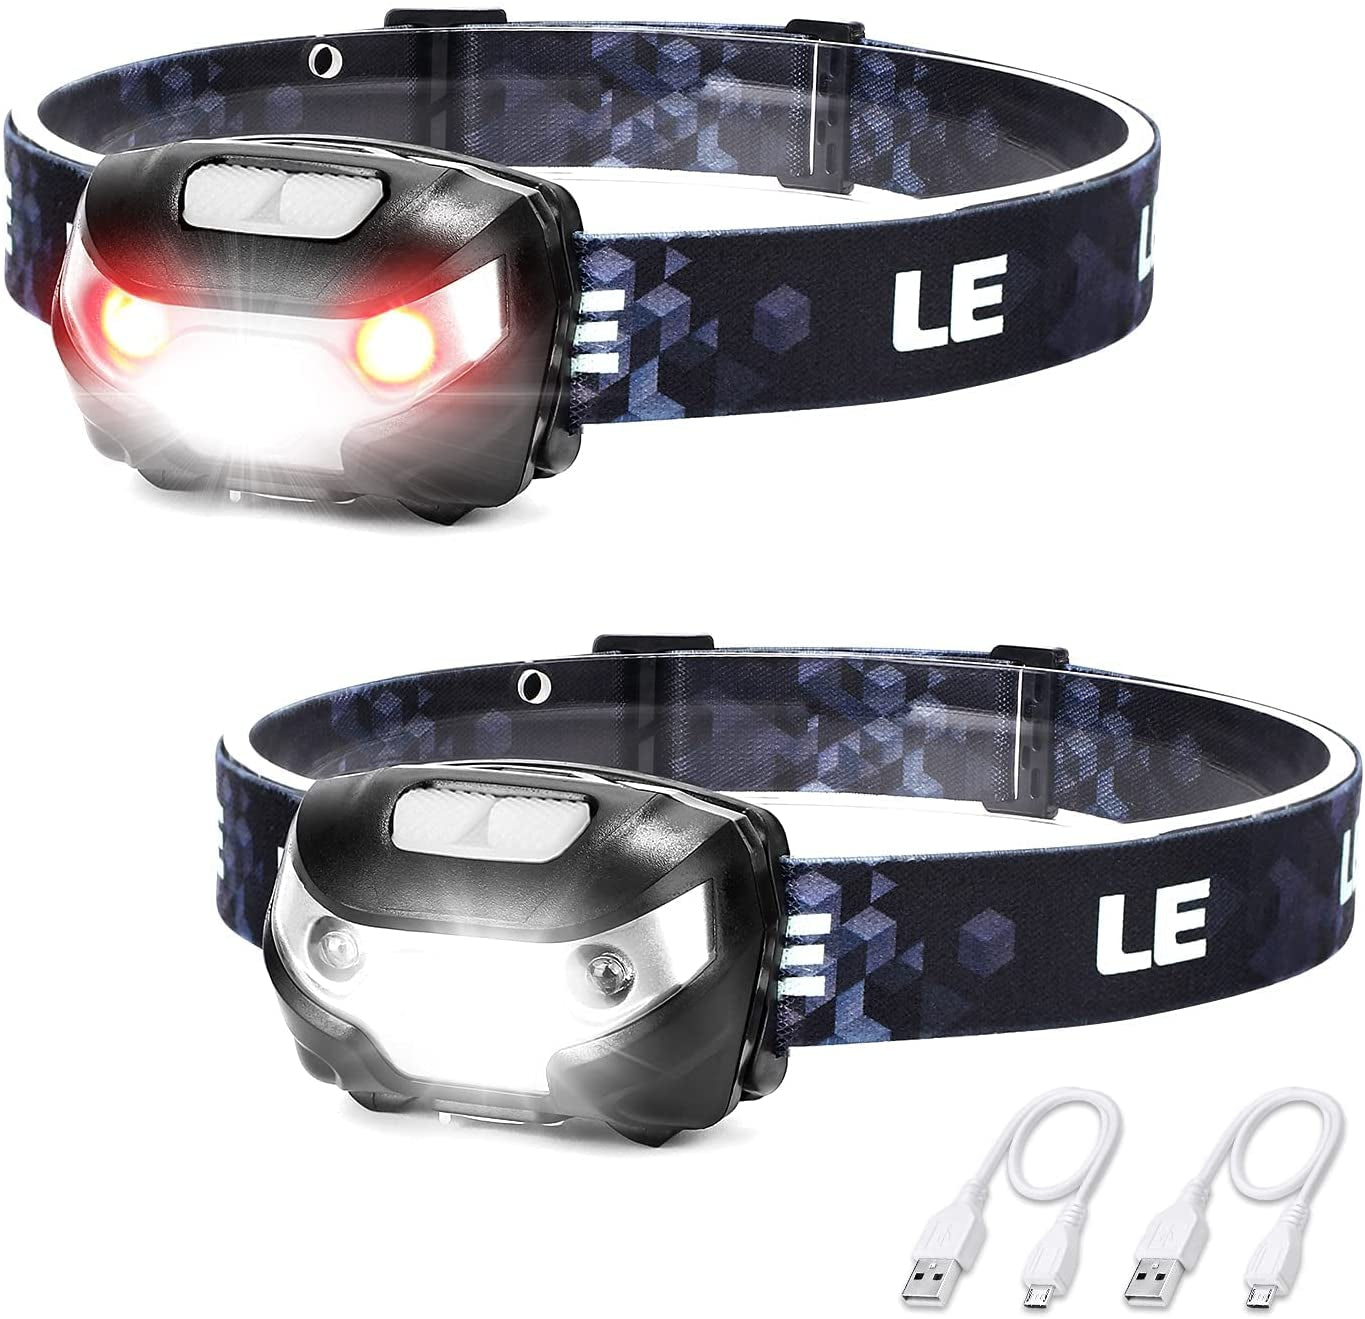 Lighting EVER, LED Headlamp Rechargeable, Super Bright Head Lamp with 5 Modes, 45°Tilt Comfortable Headlamp Flashlights for Adults and Kids, IPX4 Waterproof Headlight for Camping, Hiking, Running, Fishing, Reading